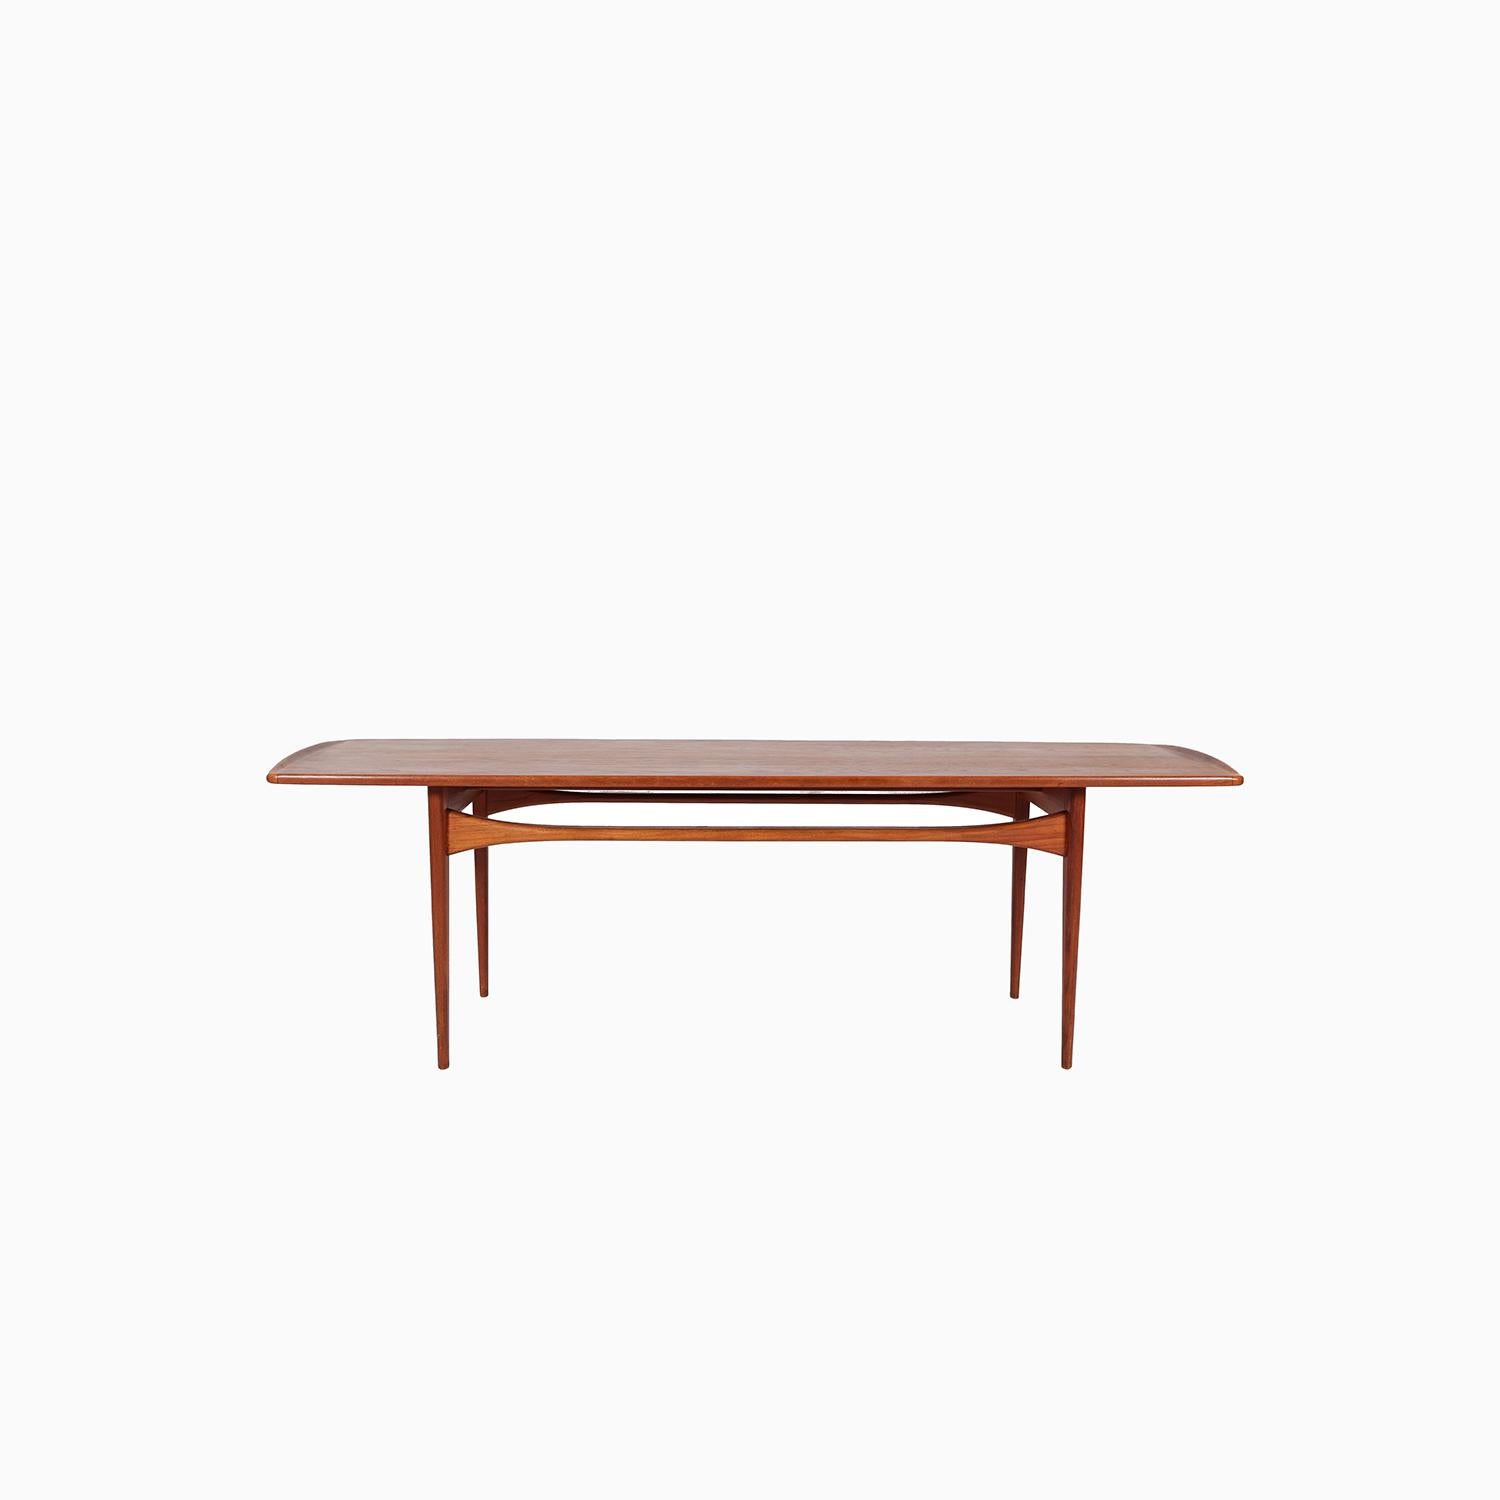 Tove & Edvard Kindt-Larsen Teak Coffee Table In Good Condition For Sale In Minneapolis, MN